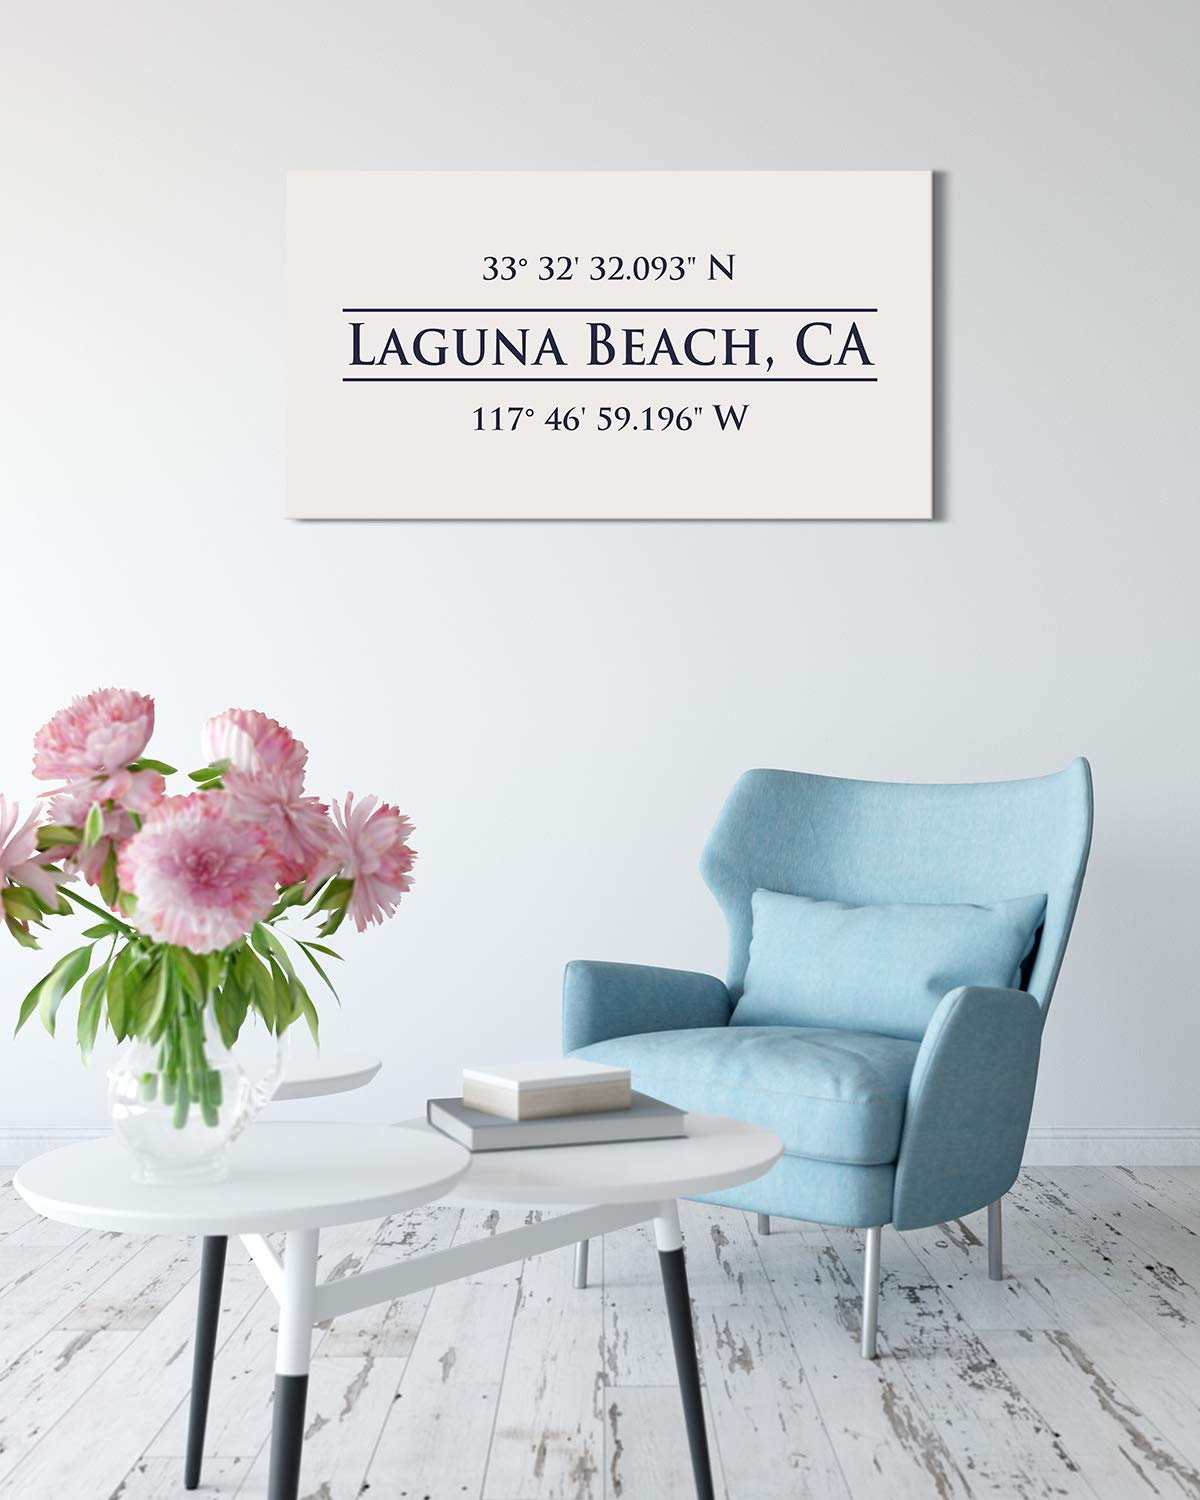 Laguna Beach, CA 33° 32' 32.093" N, 117° 46' 59.196" W - Wall Decor Art Canvas with an offwhite background - Ready to Hang - Great for above a couch, table, bed or more